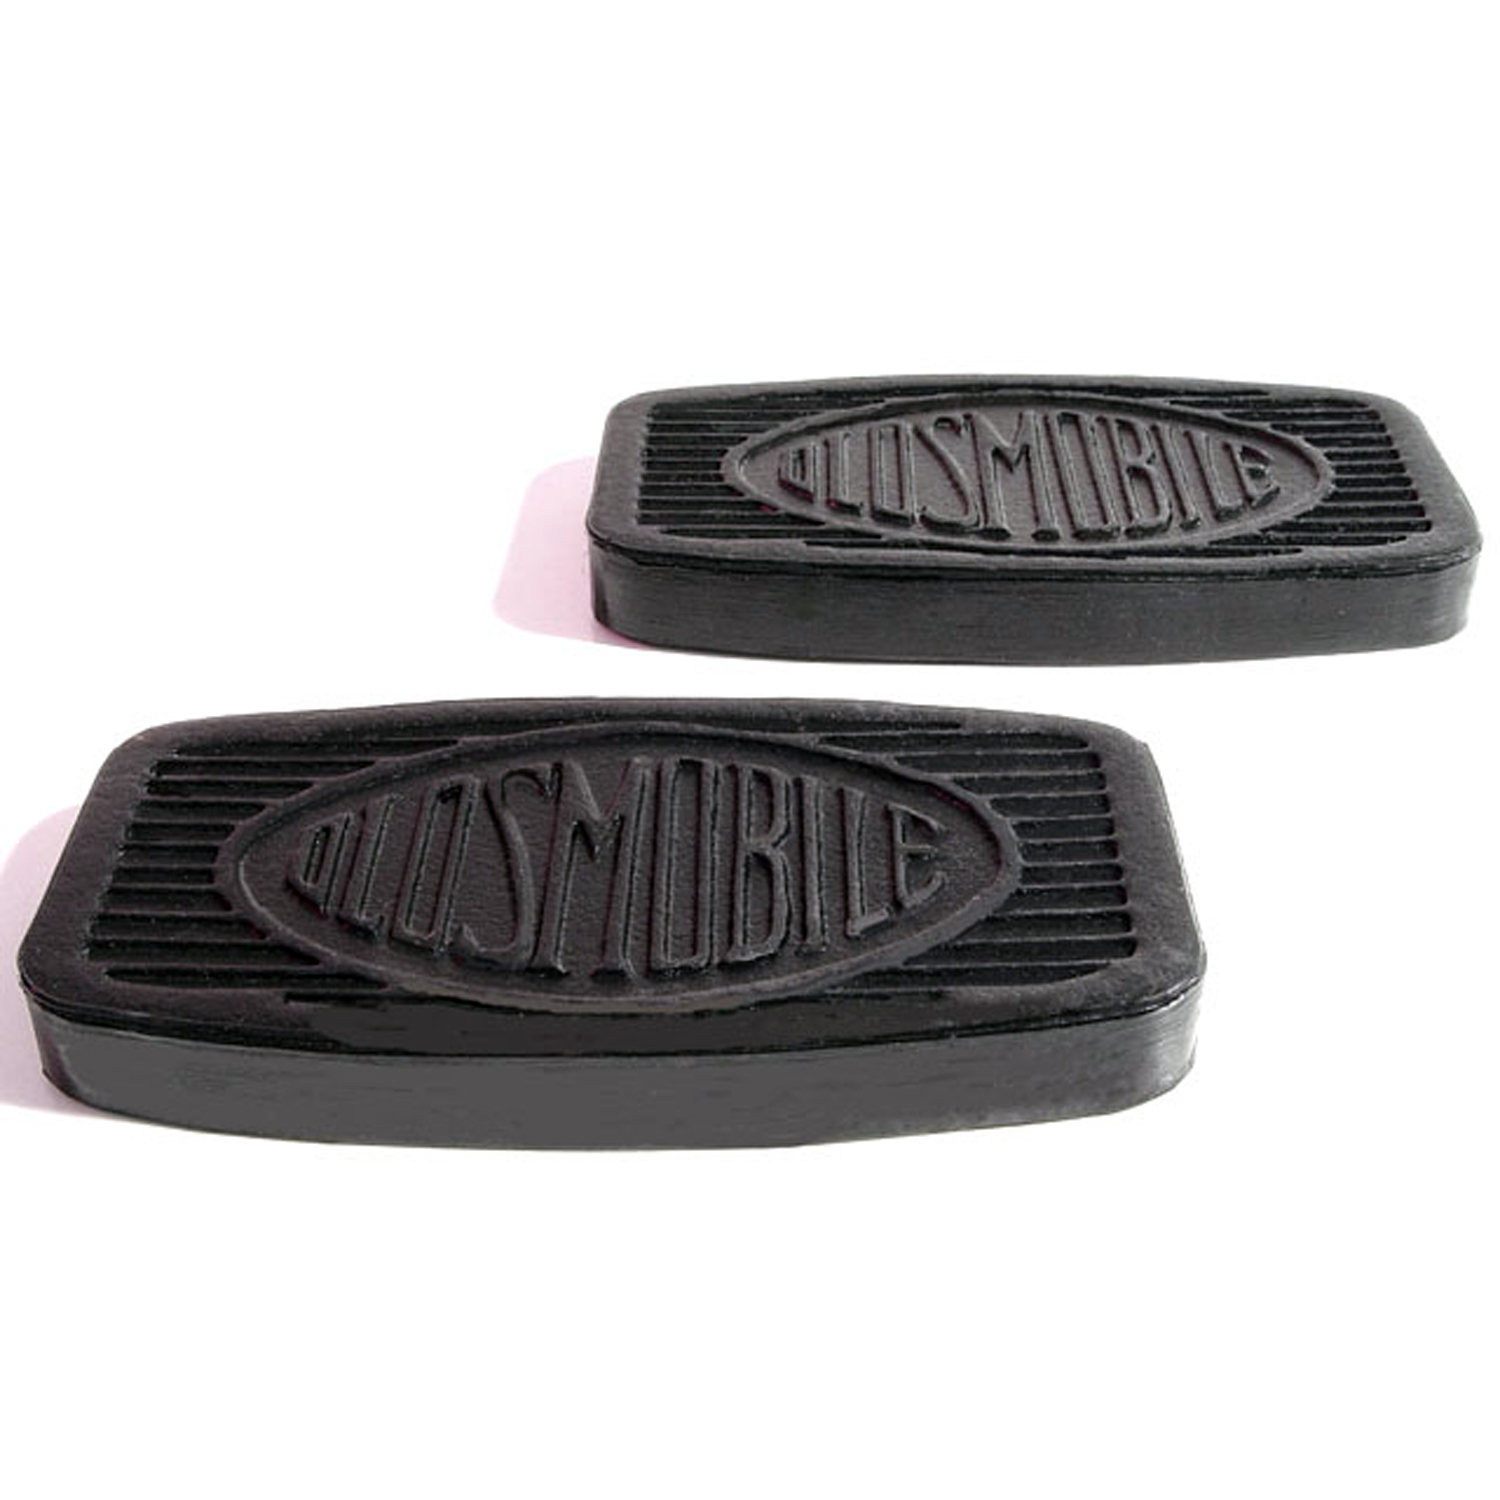 1930 Oldsmobile Model F-30 Clutch and Brake Pedal Pads.  3-1/2 wide X 1-3/16 long-CB 95